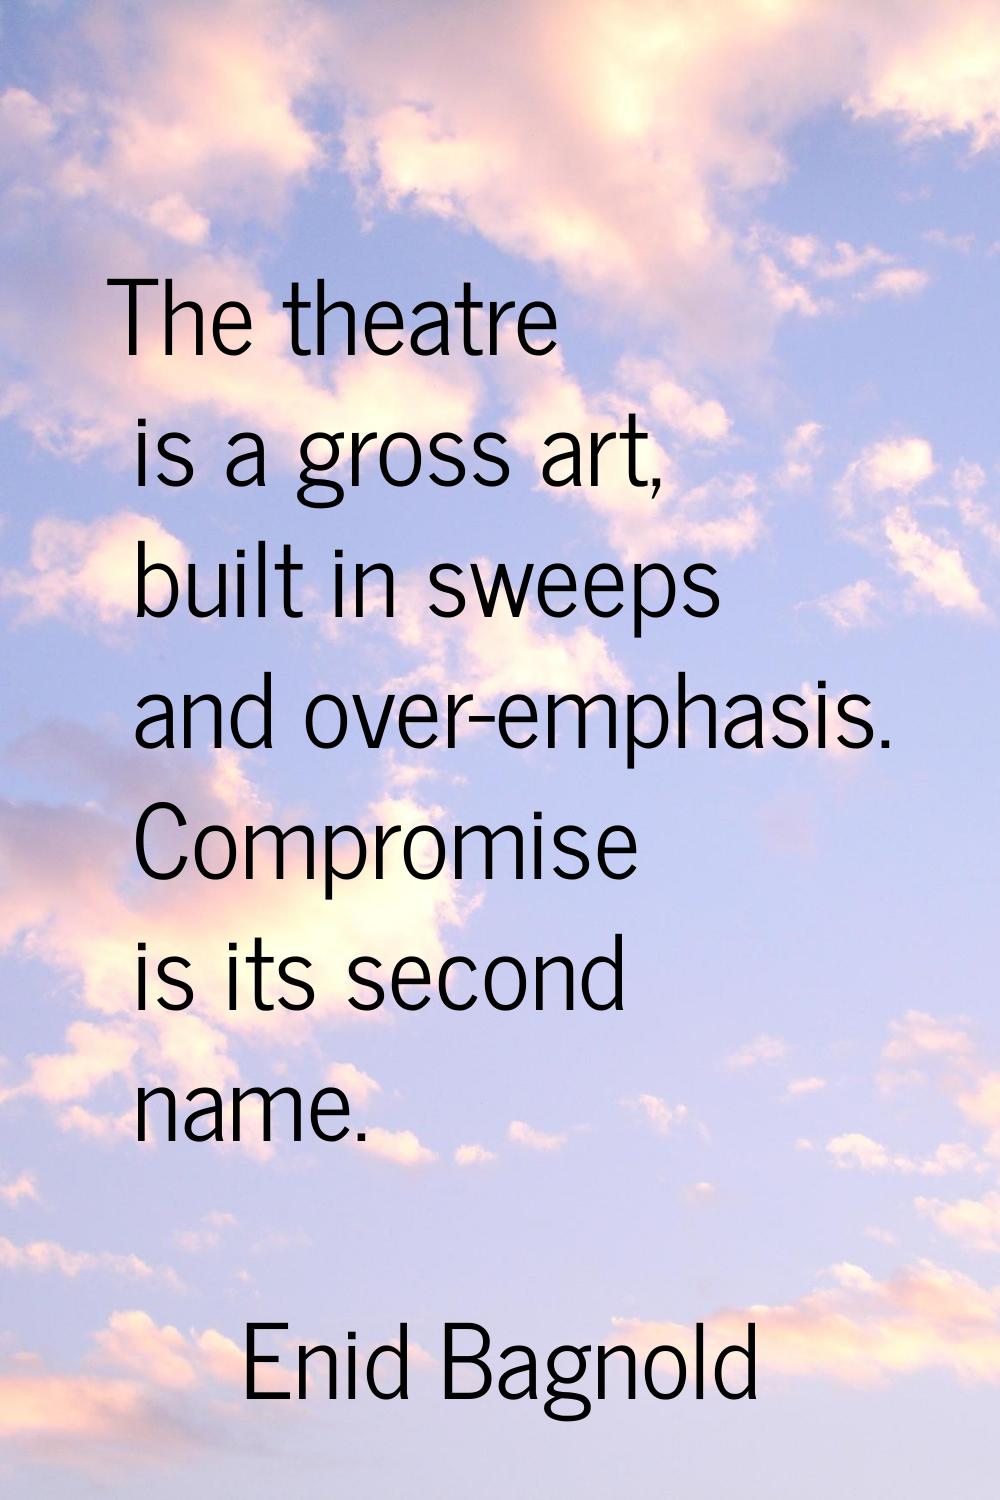 The theatre is a gross art, built in sweeps and over-emphasis. Compromise is its second name.